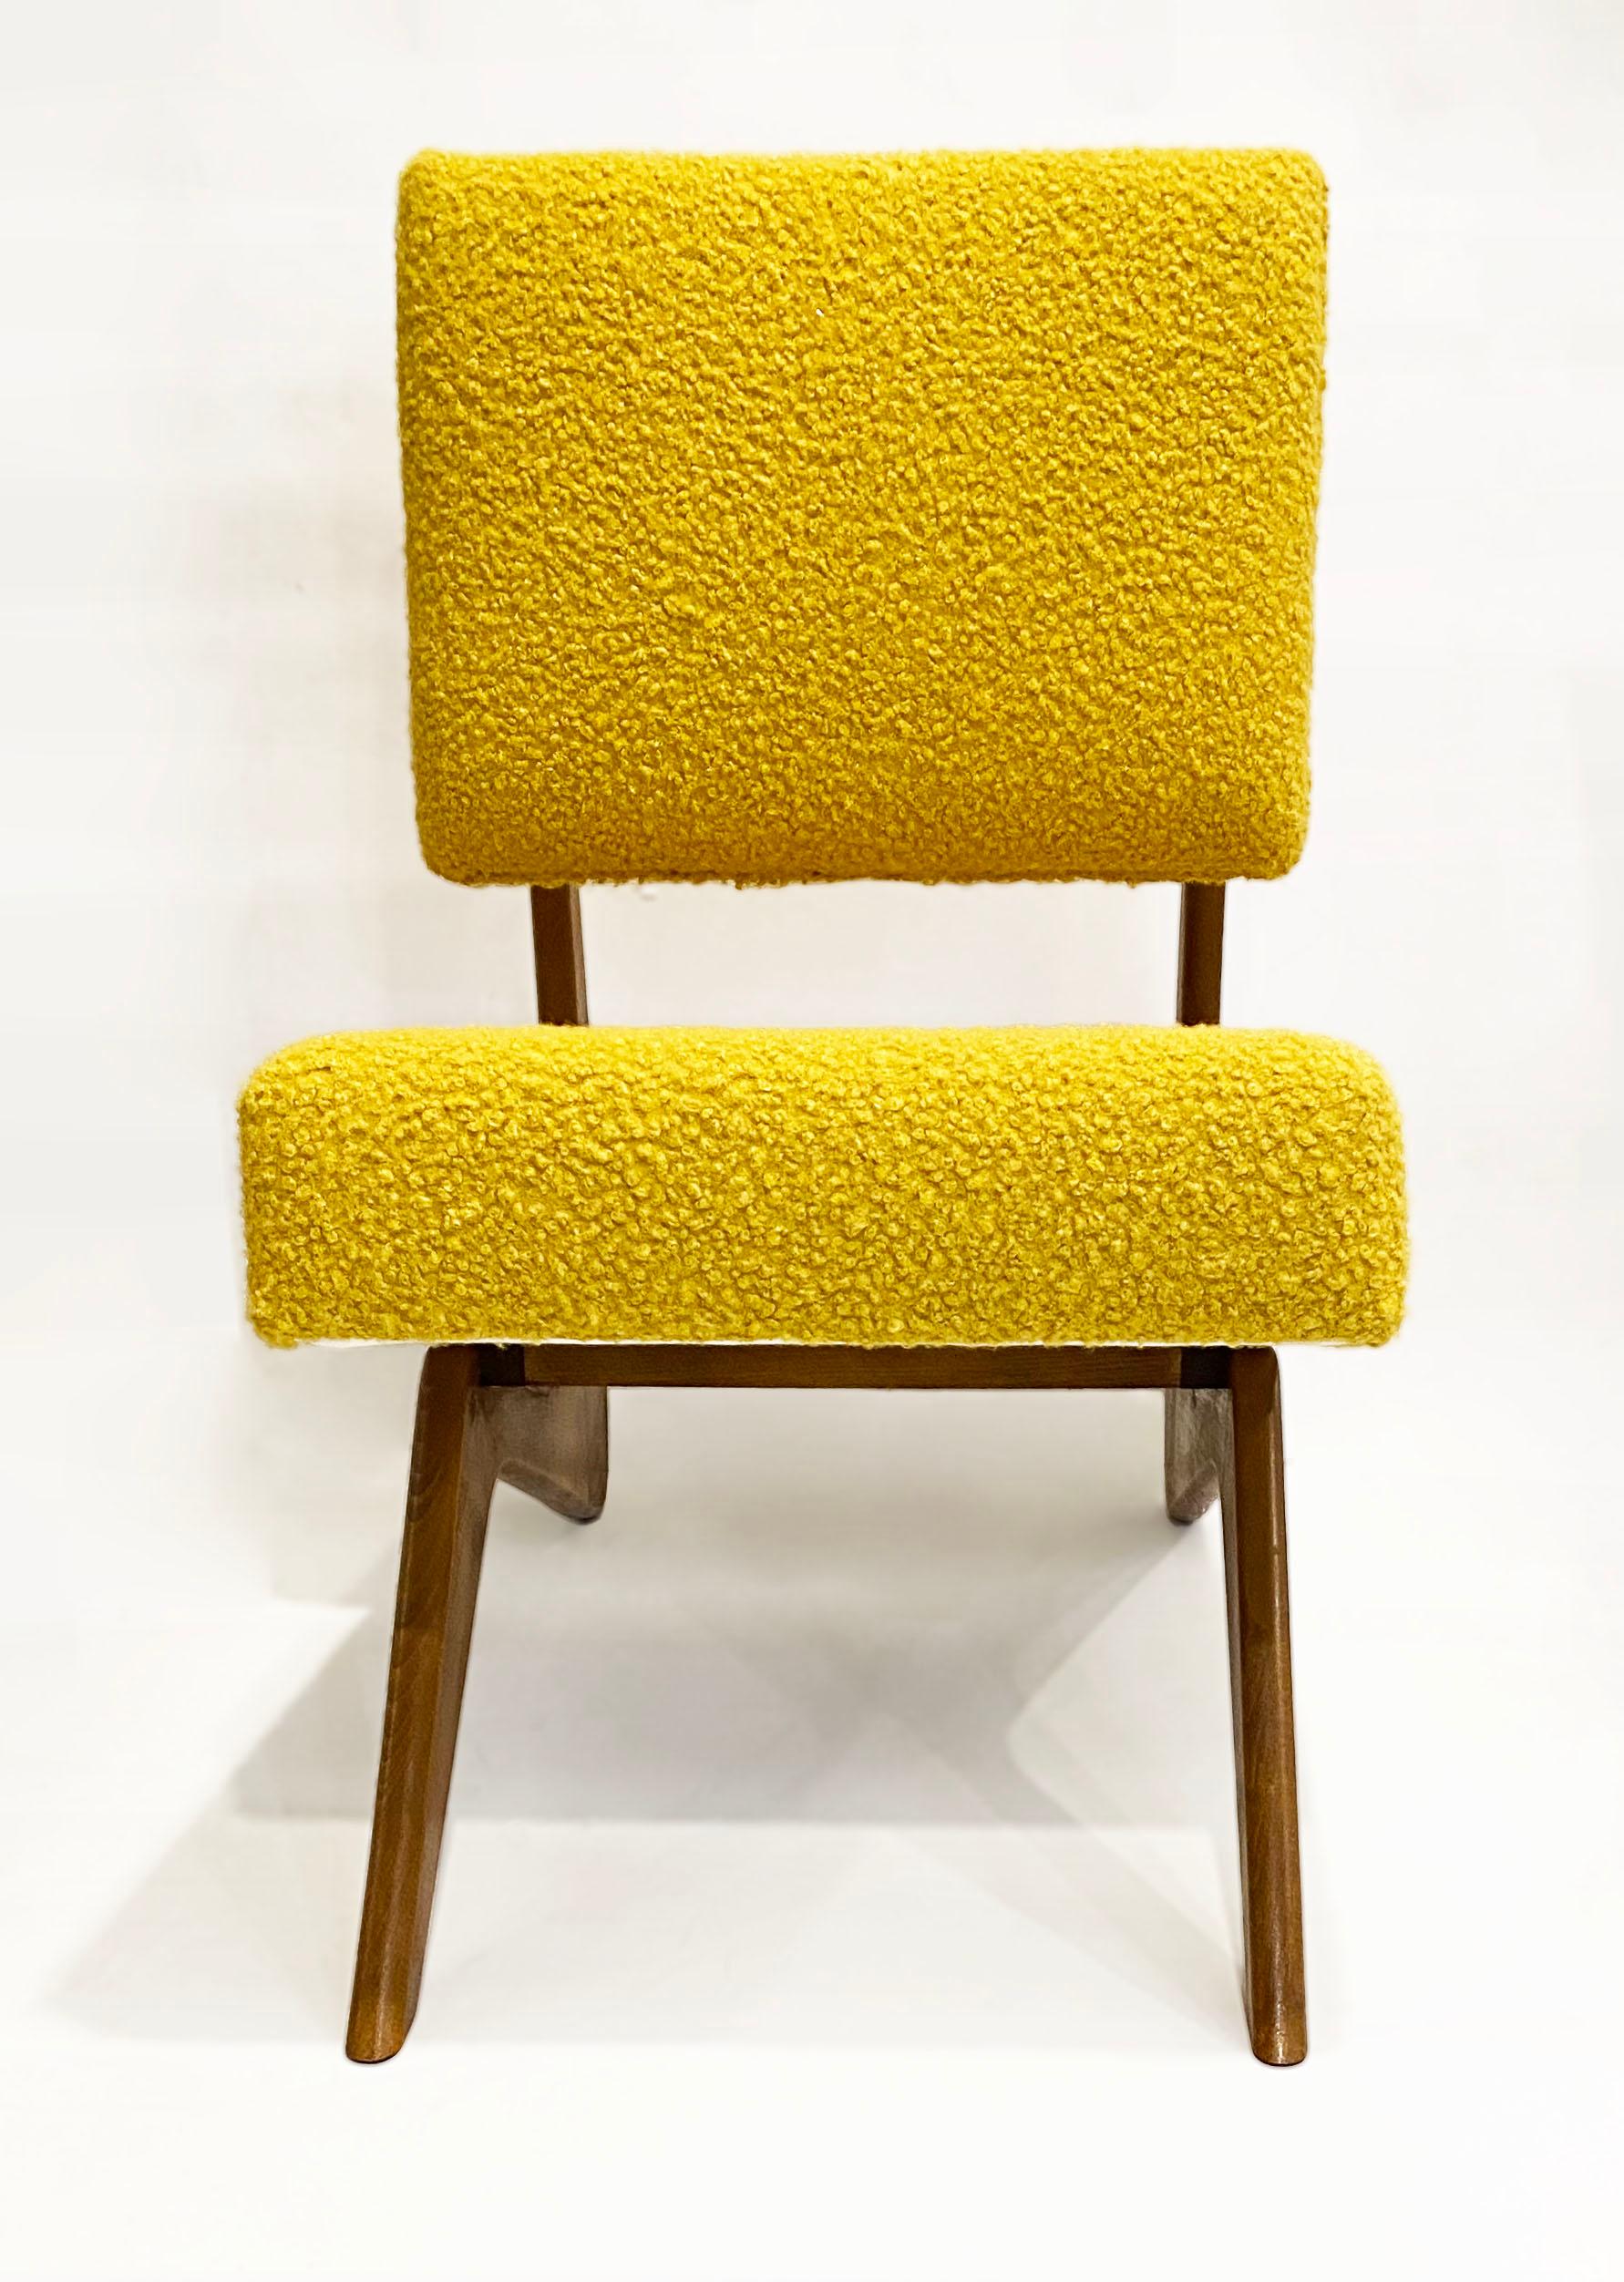 Bespoke Italian Pair of Boucle Mustard Yellow Aero Curved Beech Lounge Chairs For Sale 1